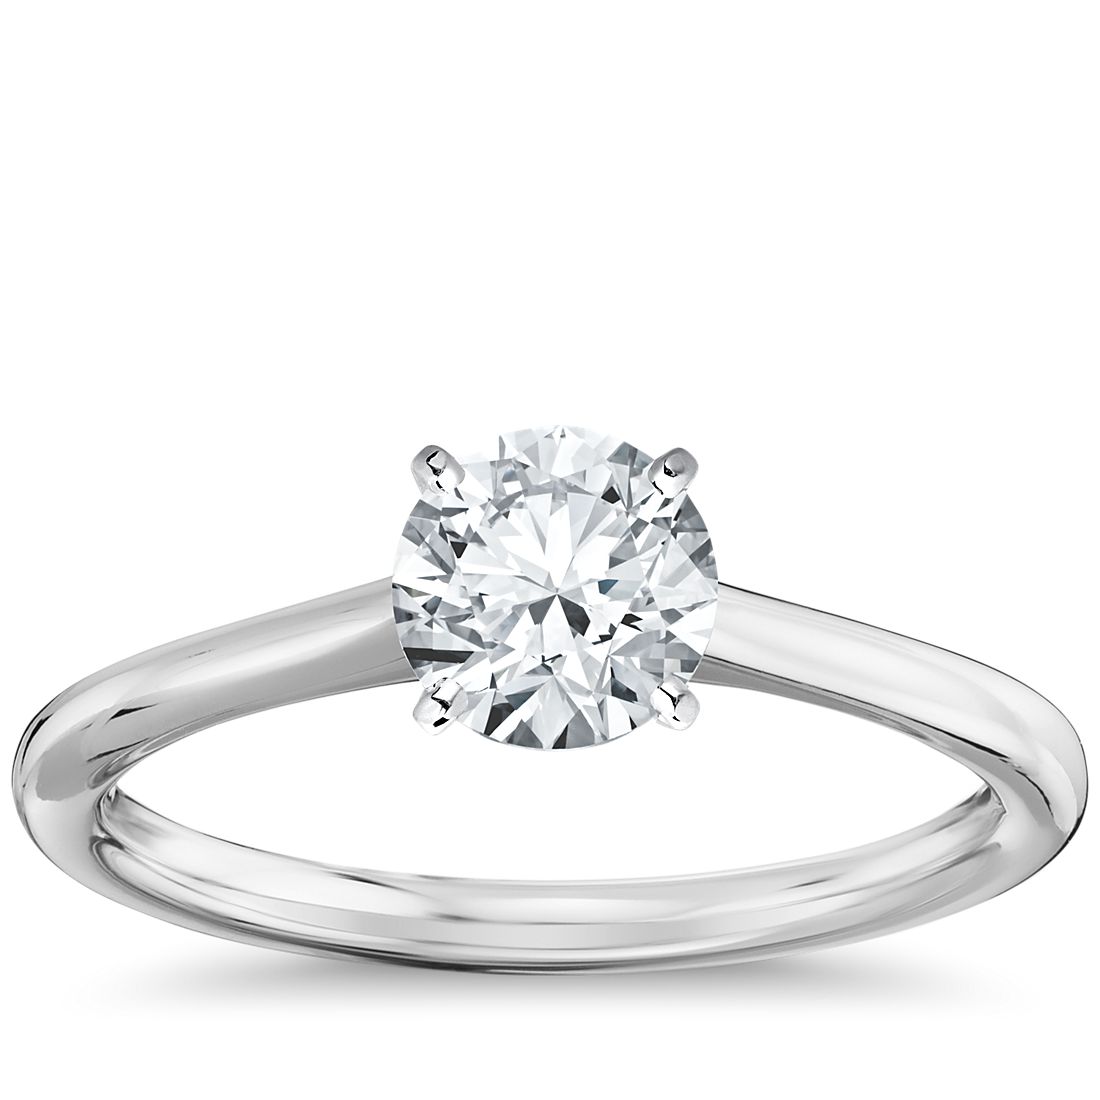 Petite Solitaire Engagement  Ring  in 14k White  Gold  Blue Nile